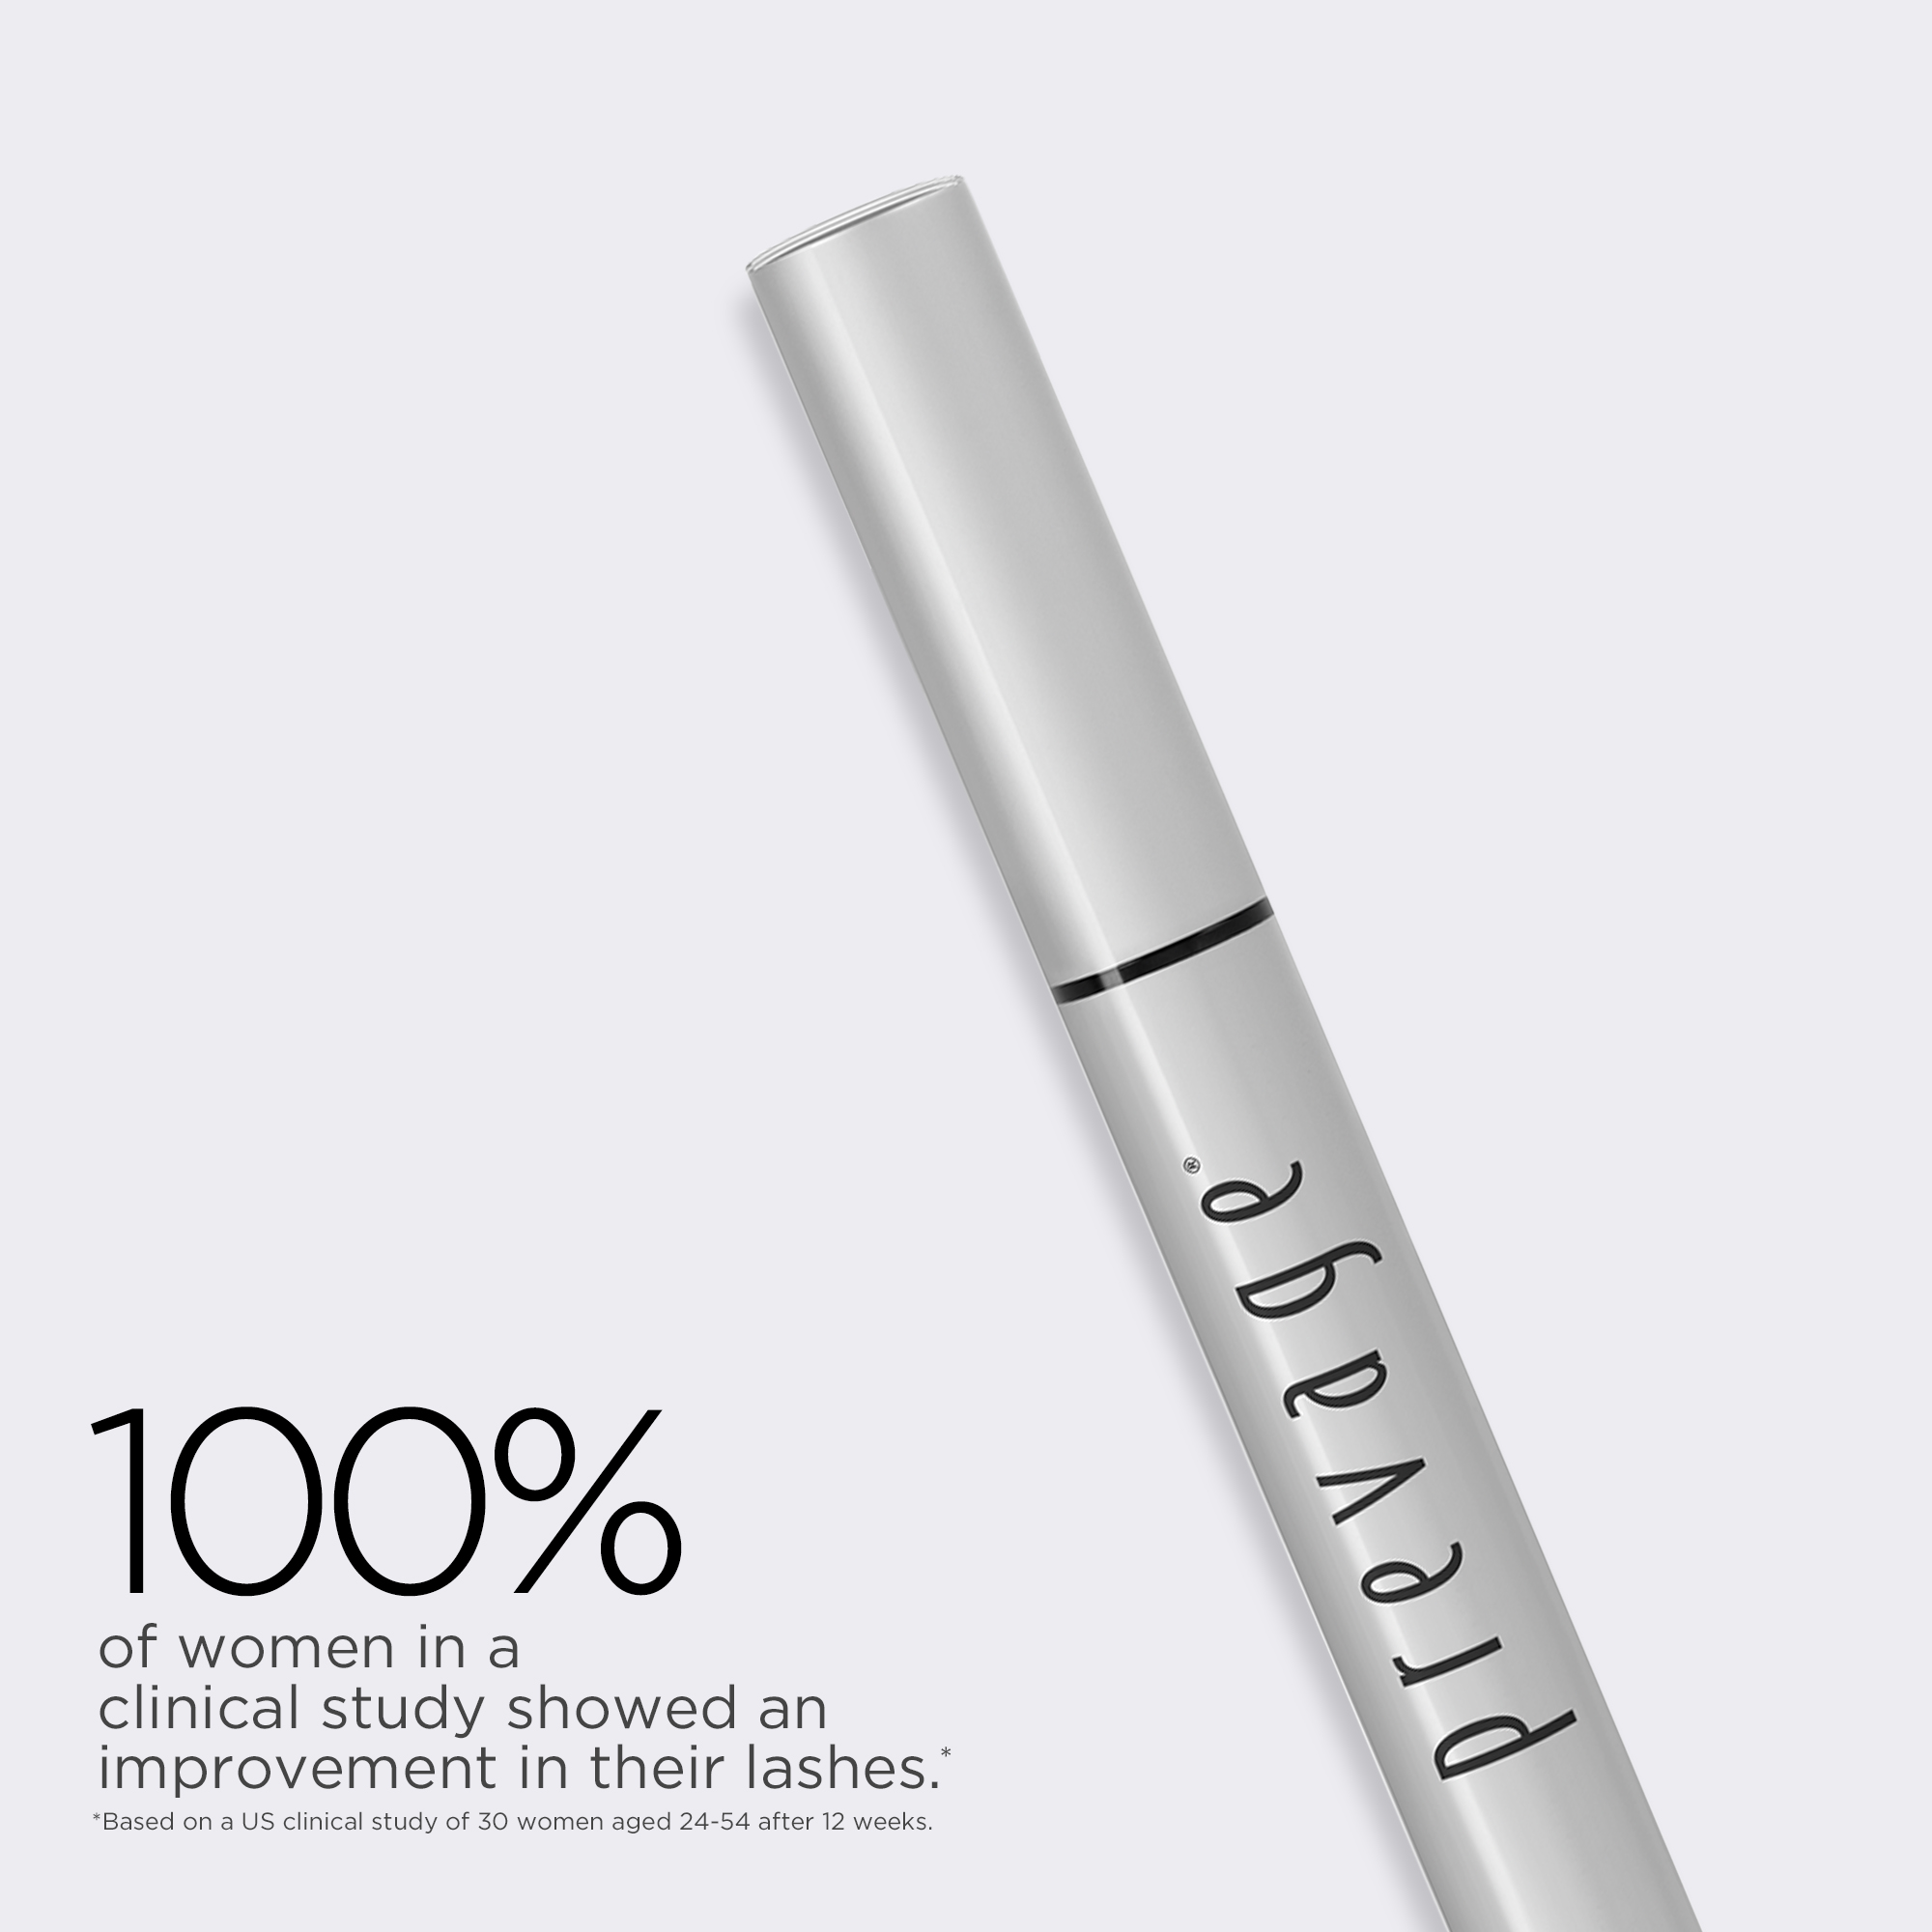 100% of women in a clinical study showed an improvement in their lashes based on a US clinical study of 30 women aged 24-54 after 12 weeks. 